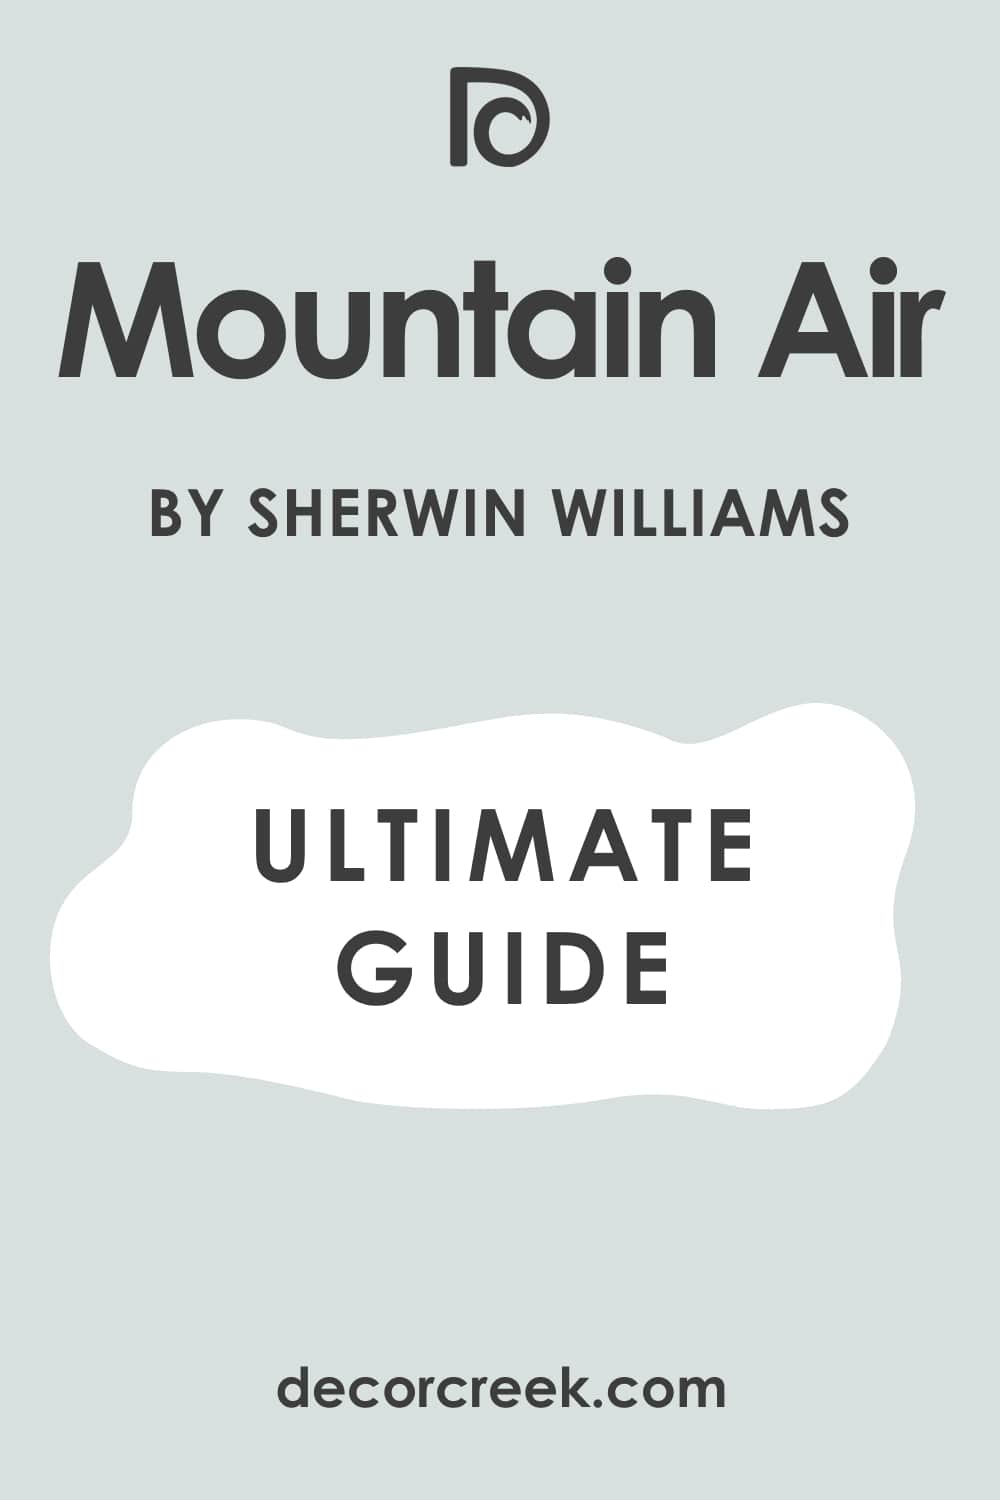 Ultimate Guide of Mountain Air SW-6224 